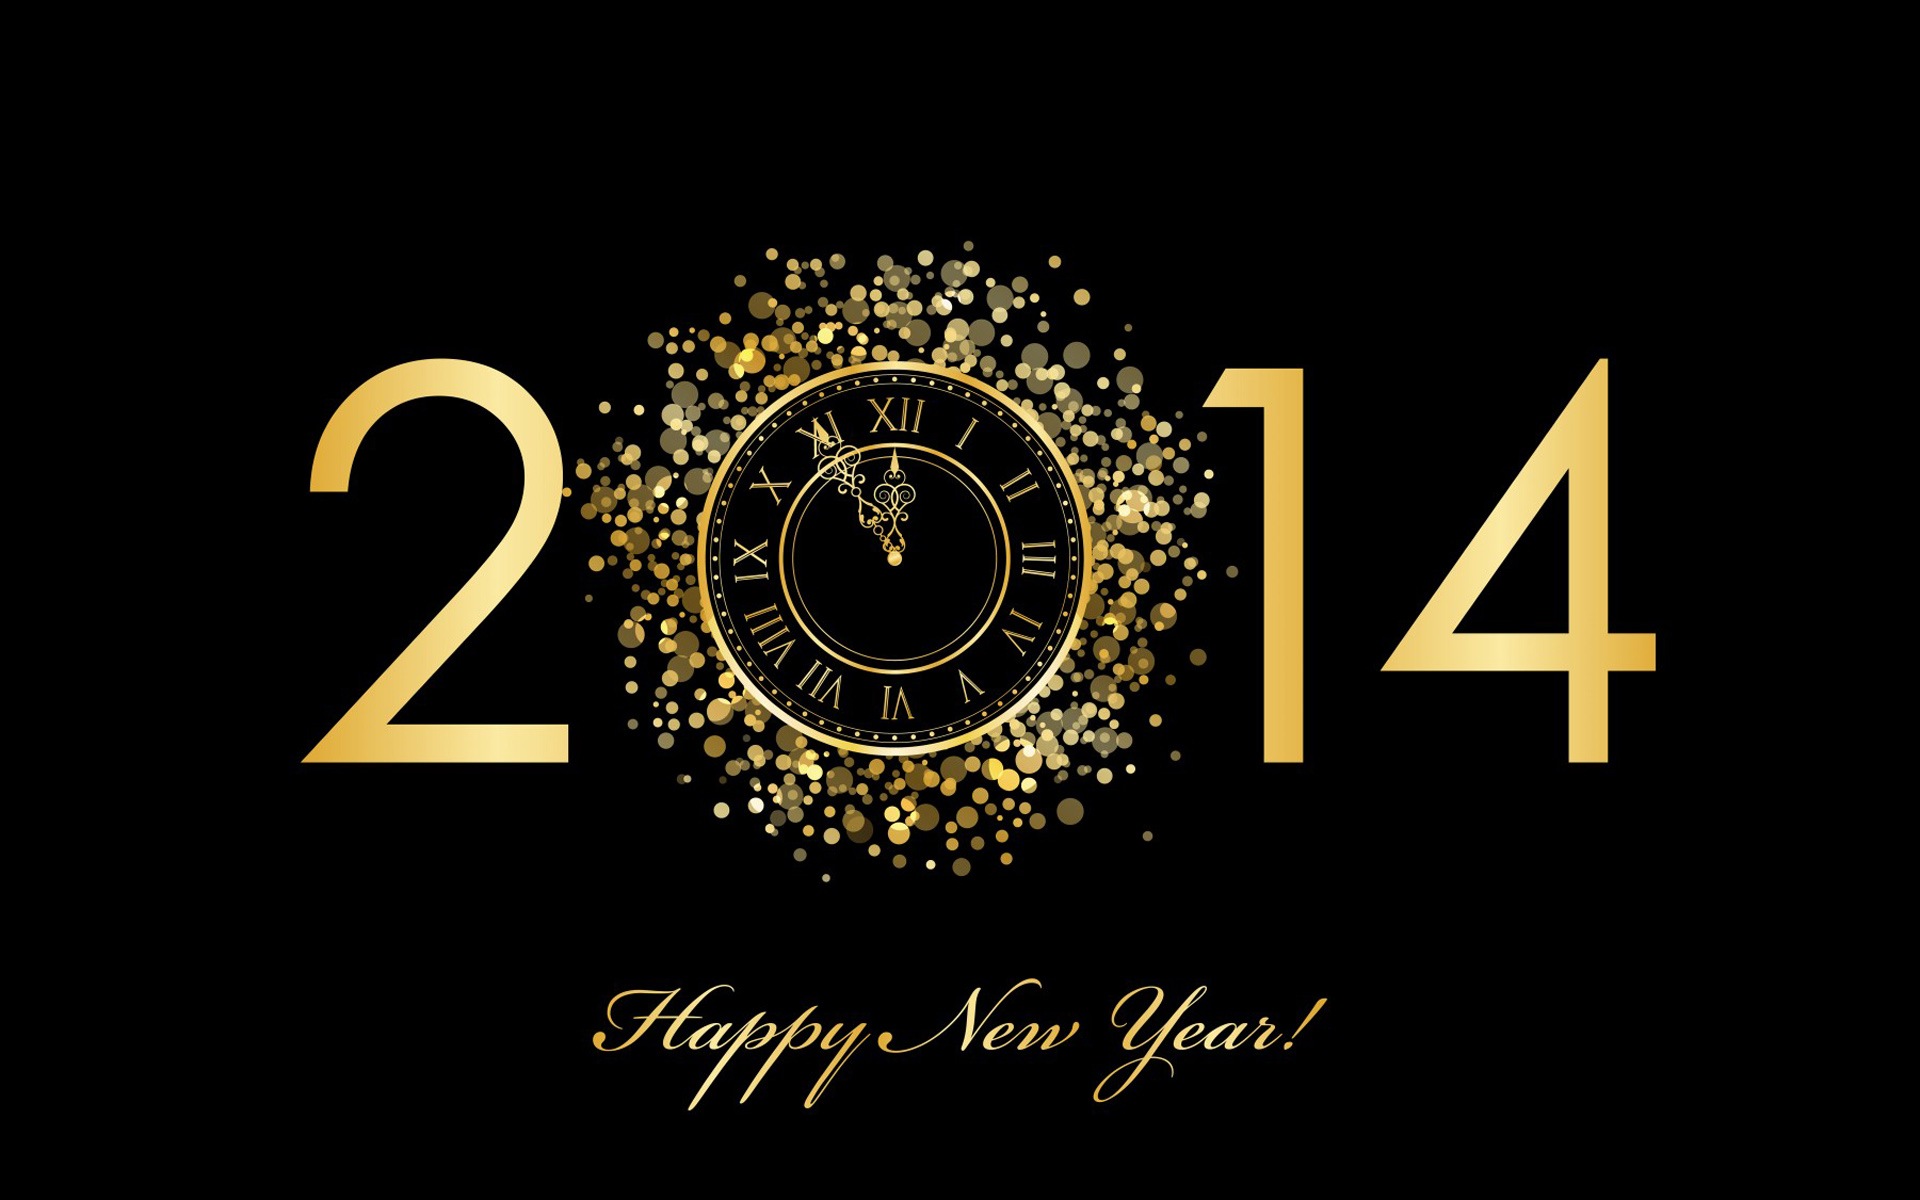 2014 New Year Theme HD Wallpapers (1) #1 - 1920x1200